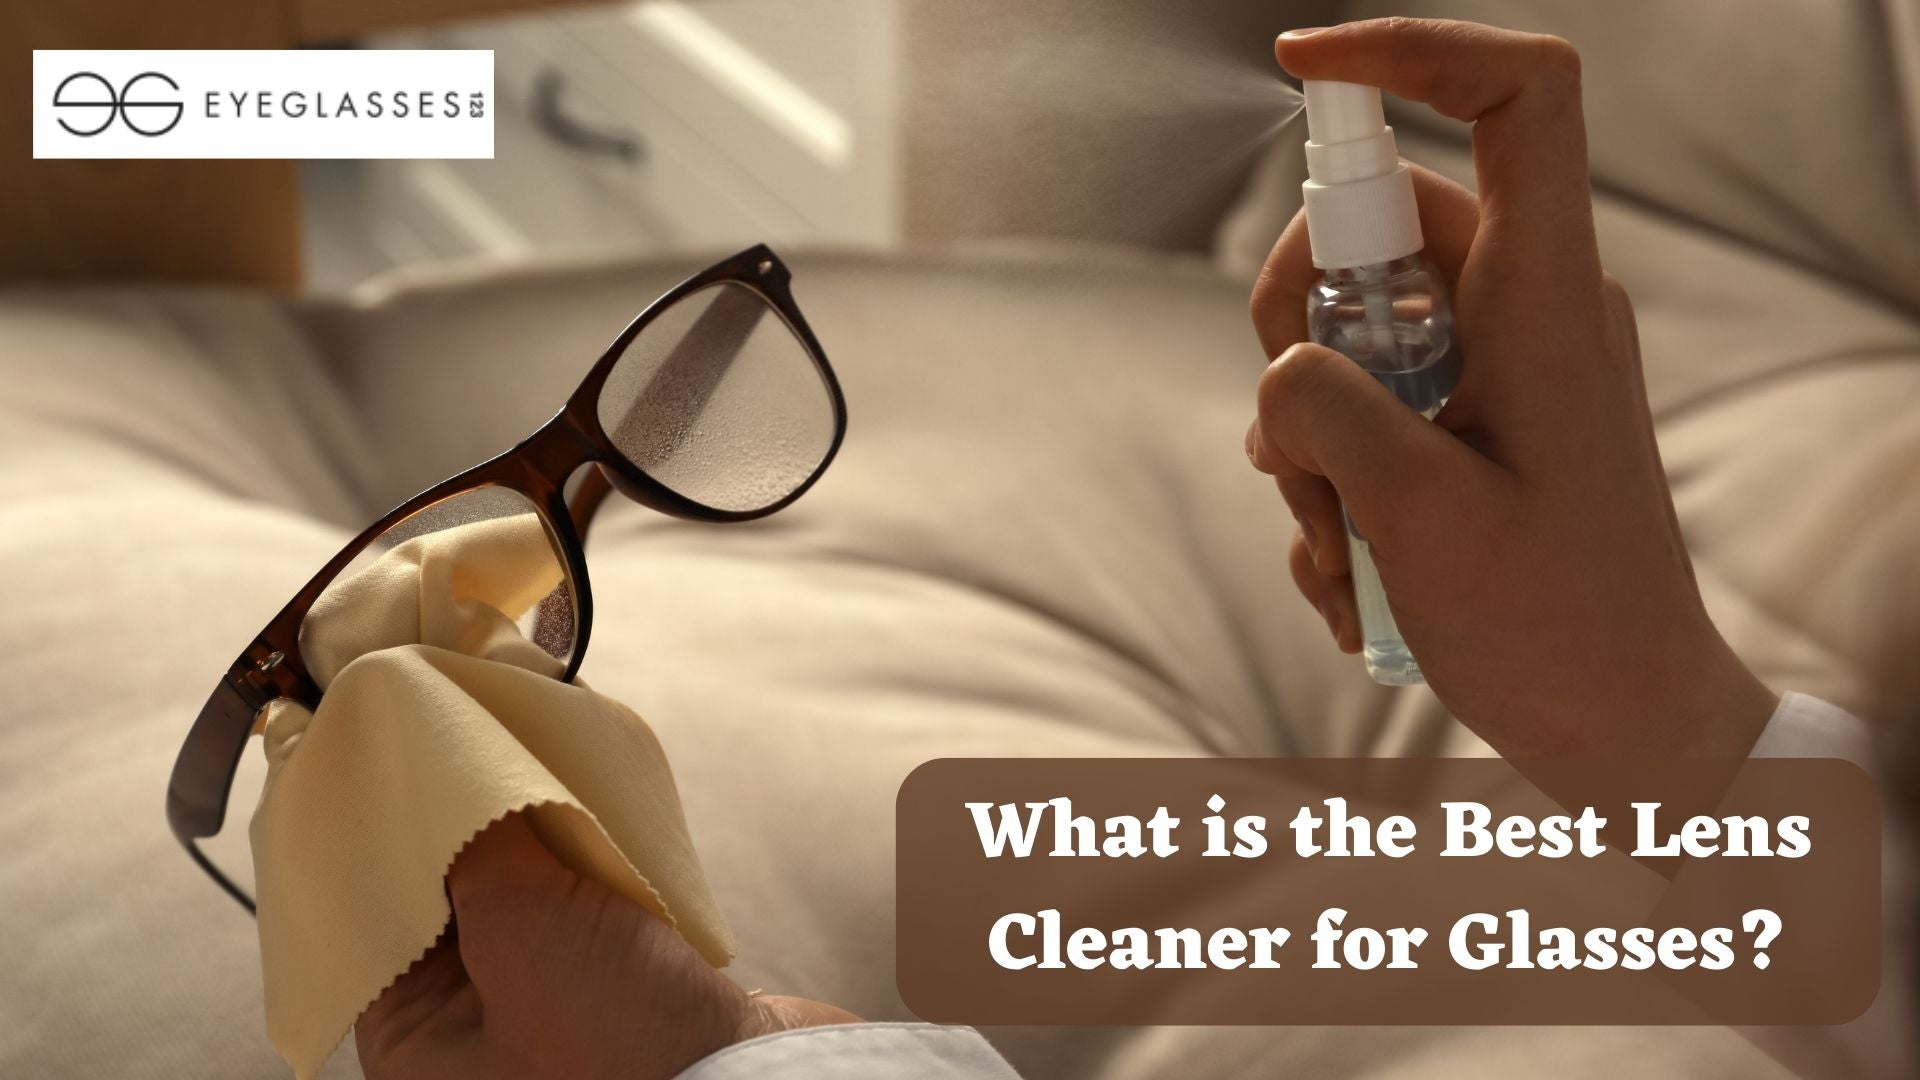 What is the Best Lens Cleaner for Glasses?